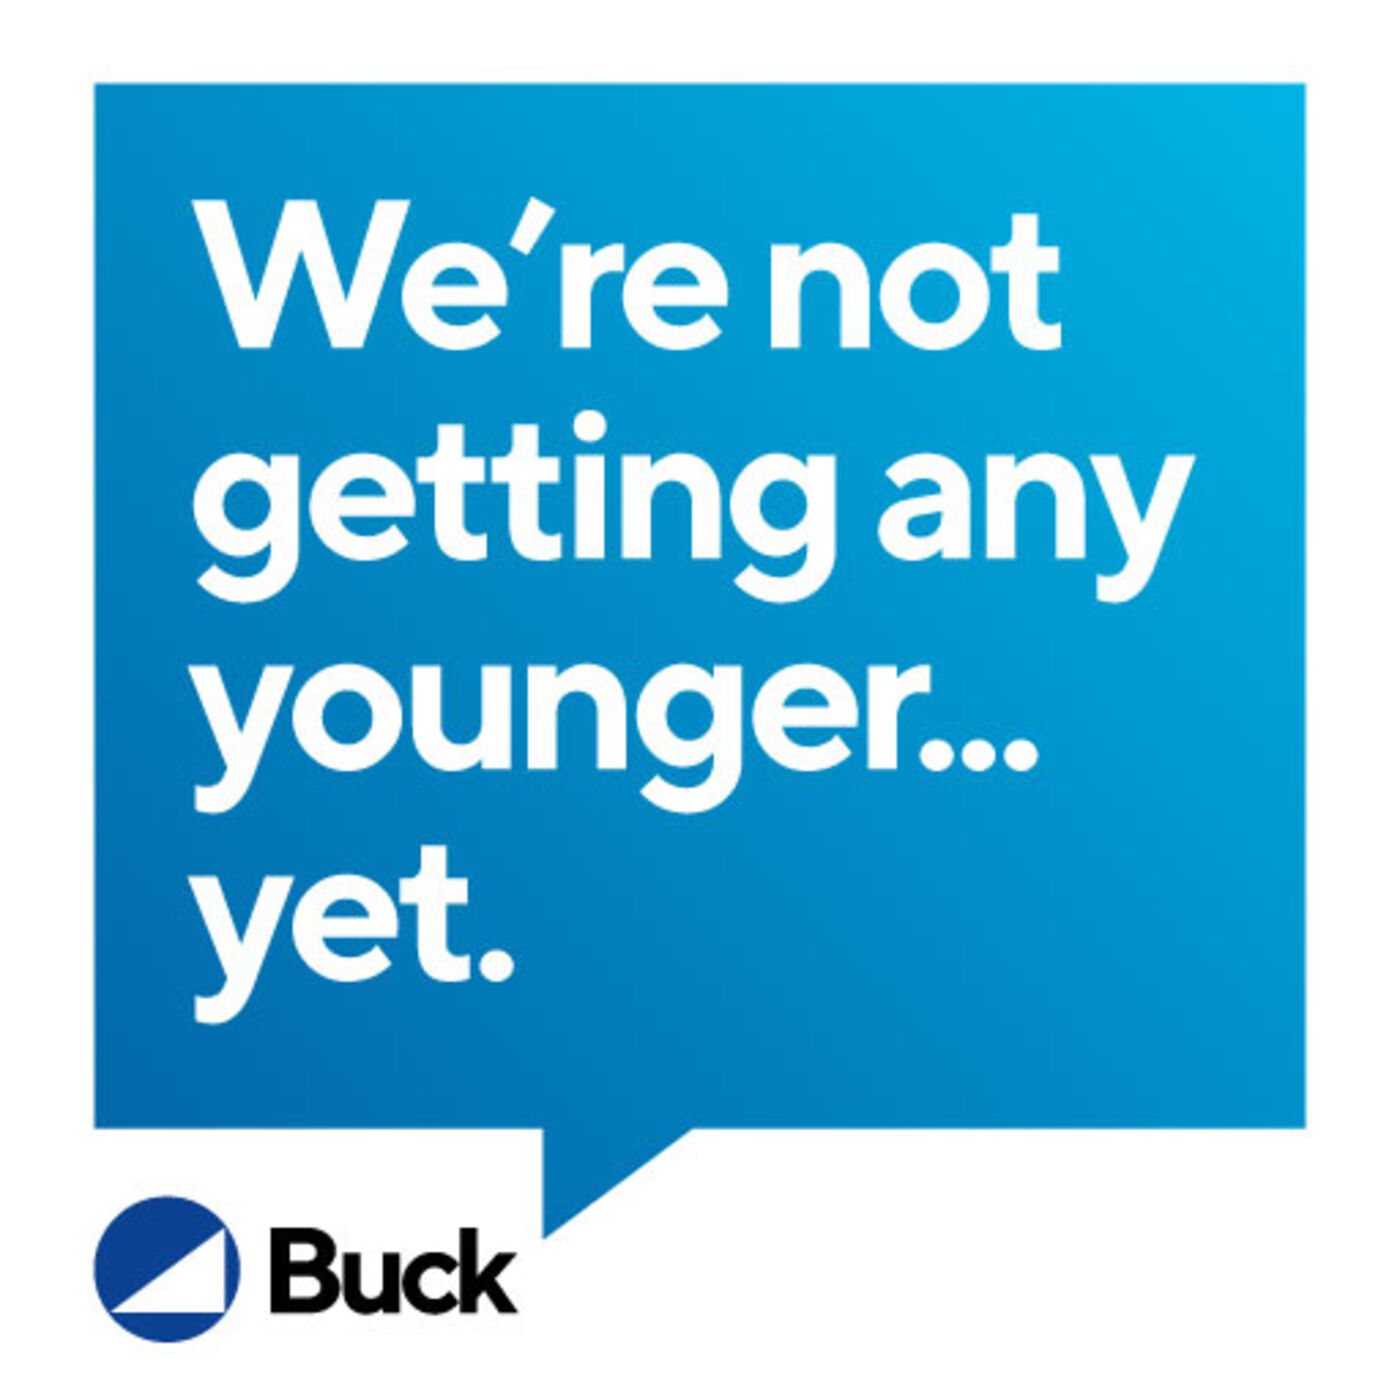 We're not getting any younger... yet.